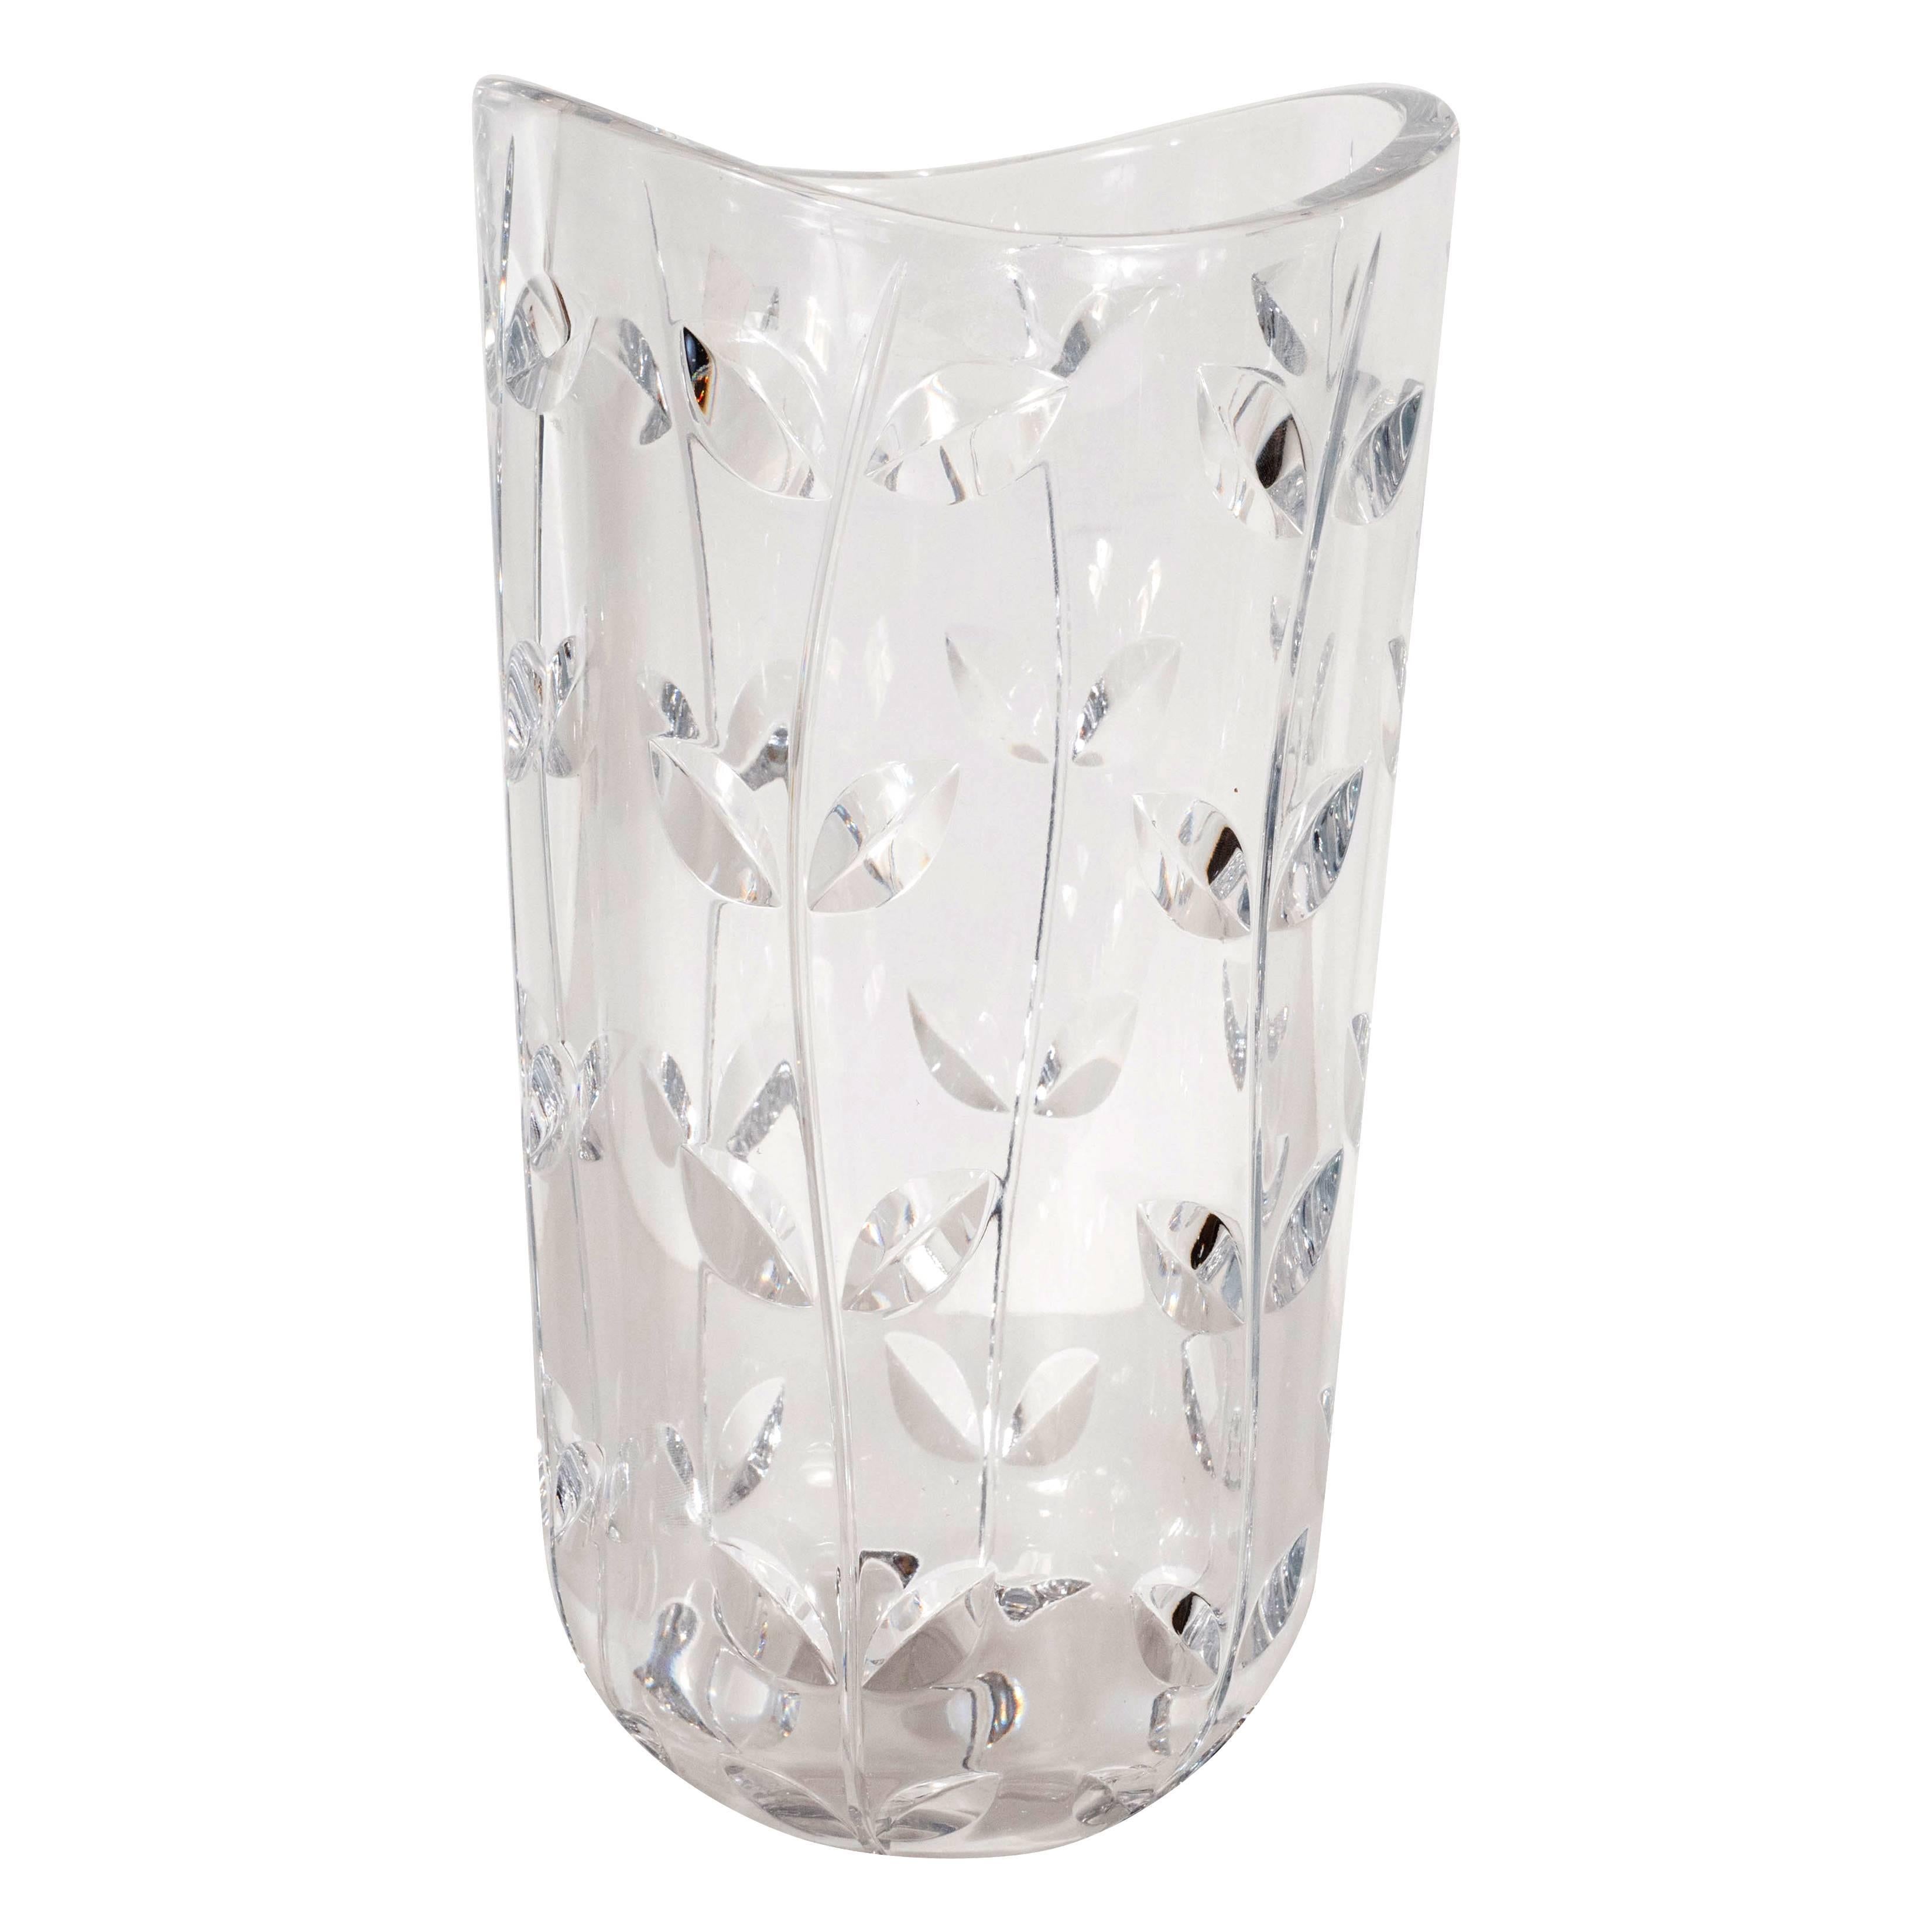 Large Modernist Crystal Vase with Incised Foliate Patterns by Tiffany & Co.